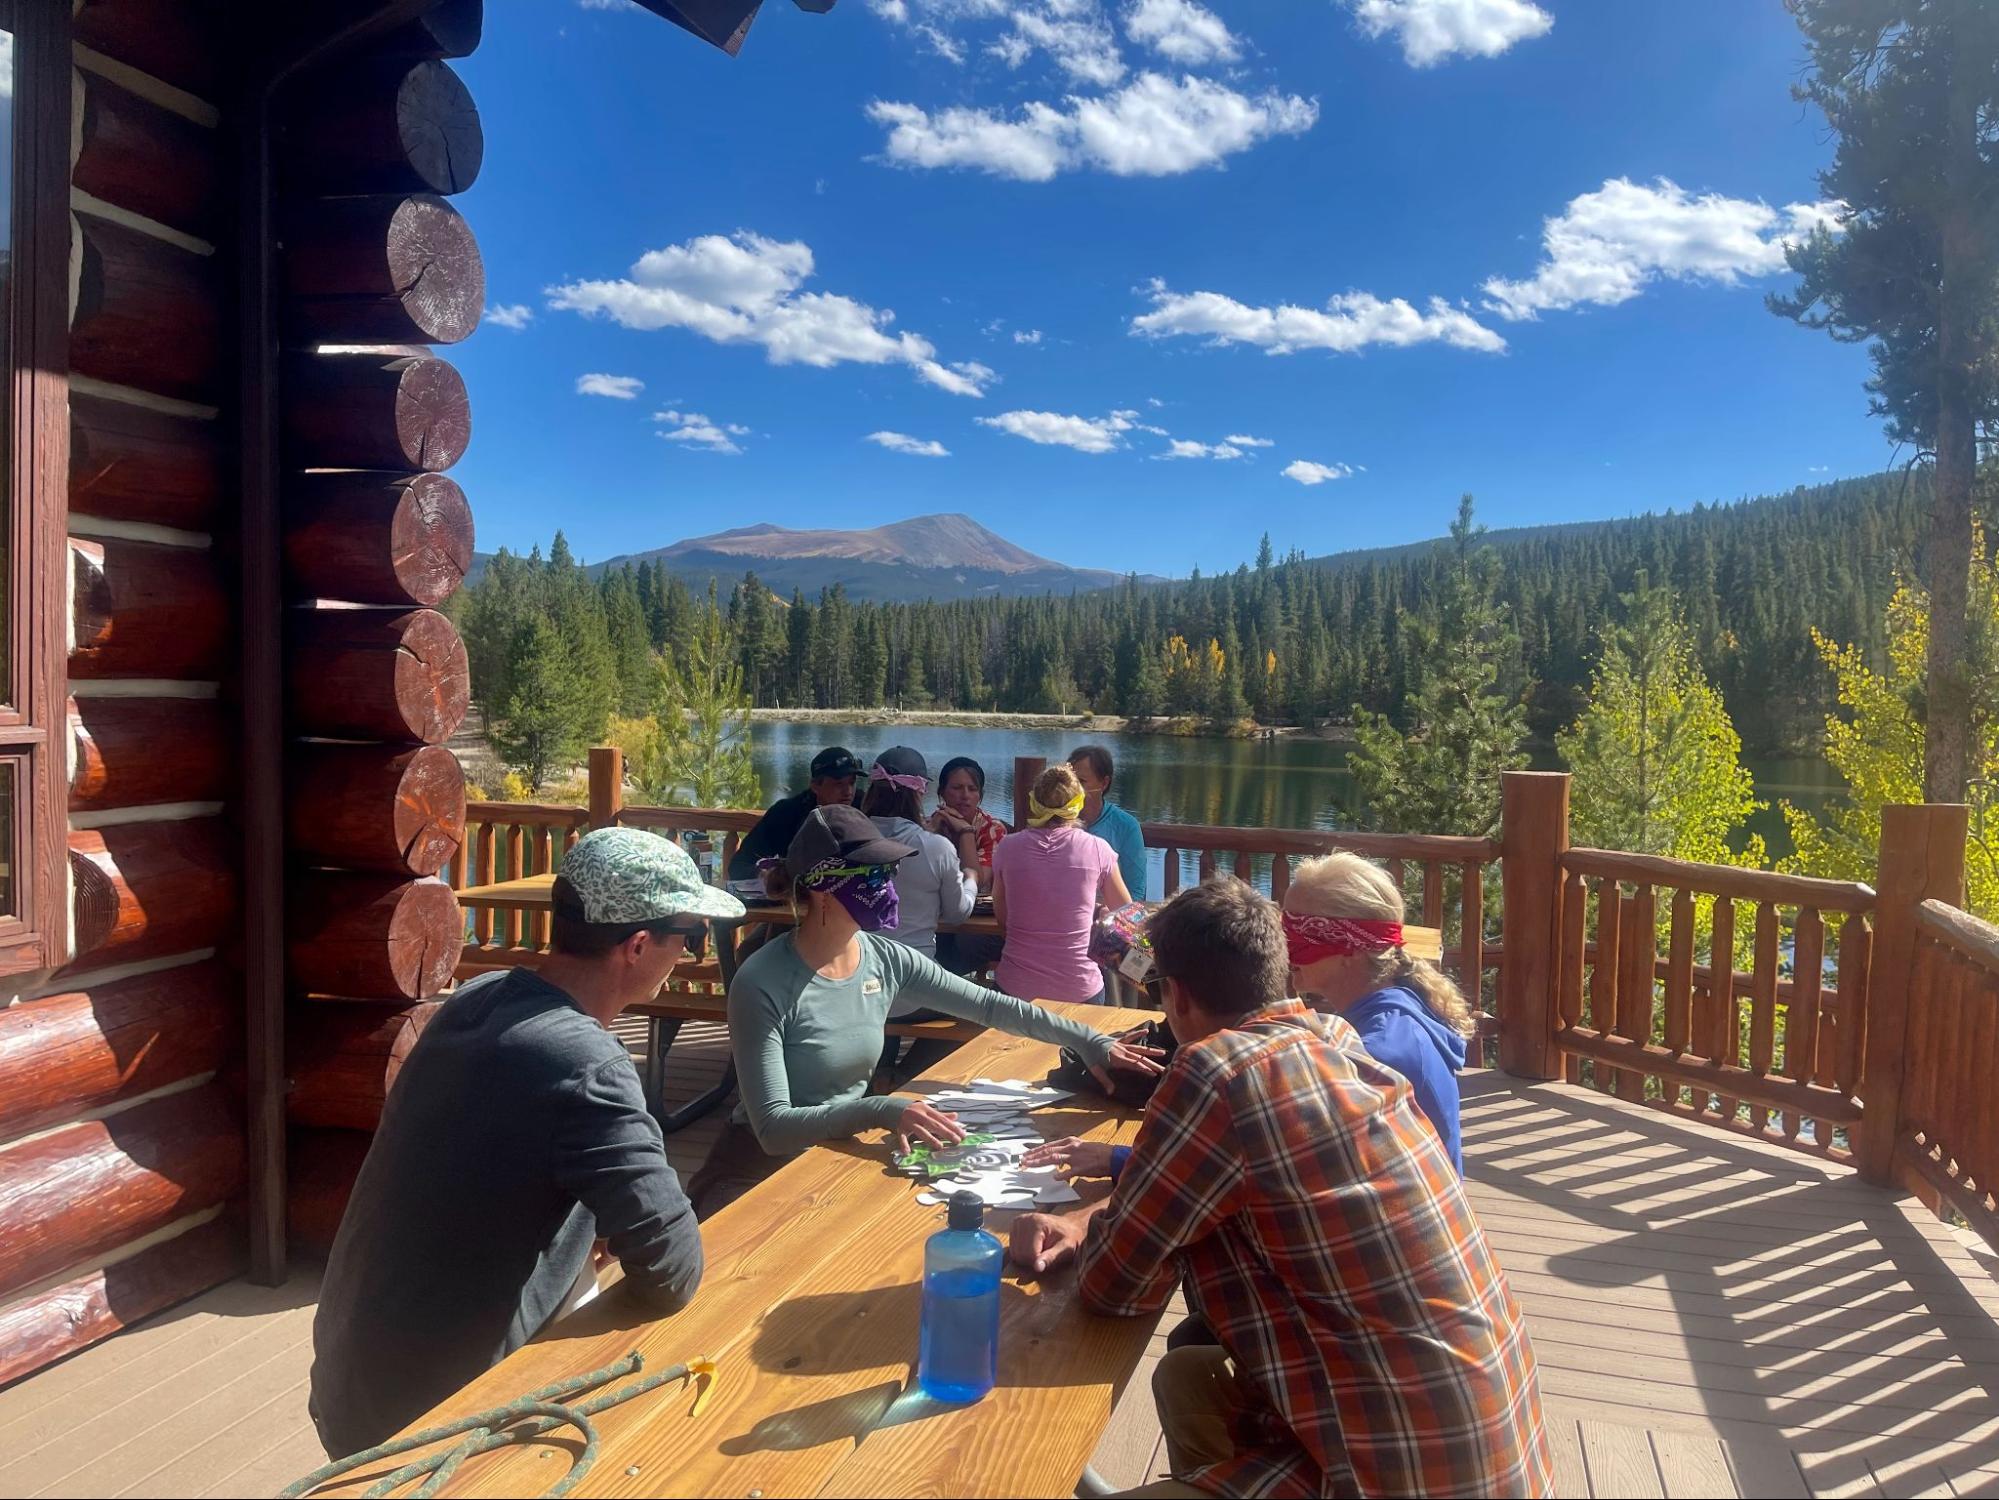 Team building activities on the deck of the Griffith Lodge.